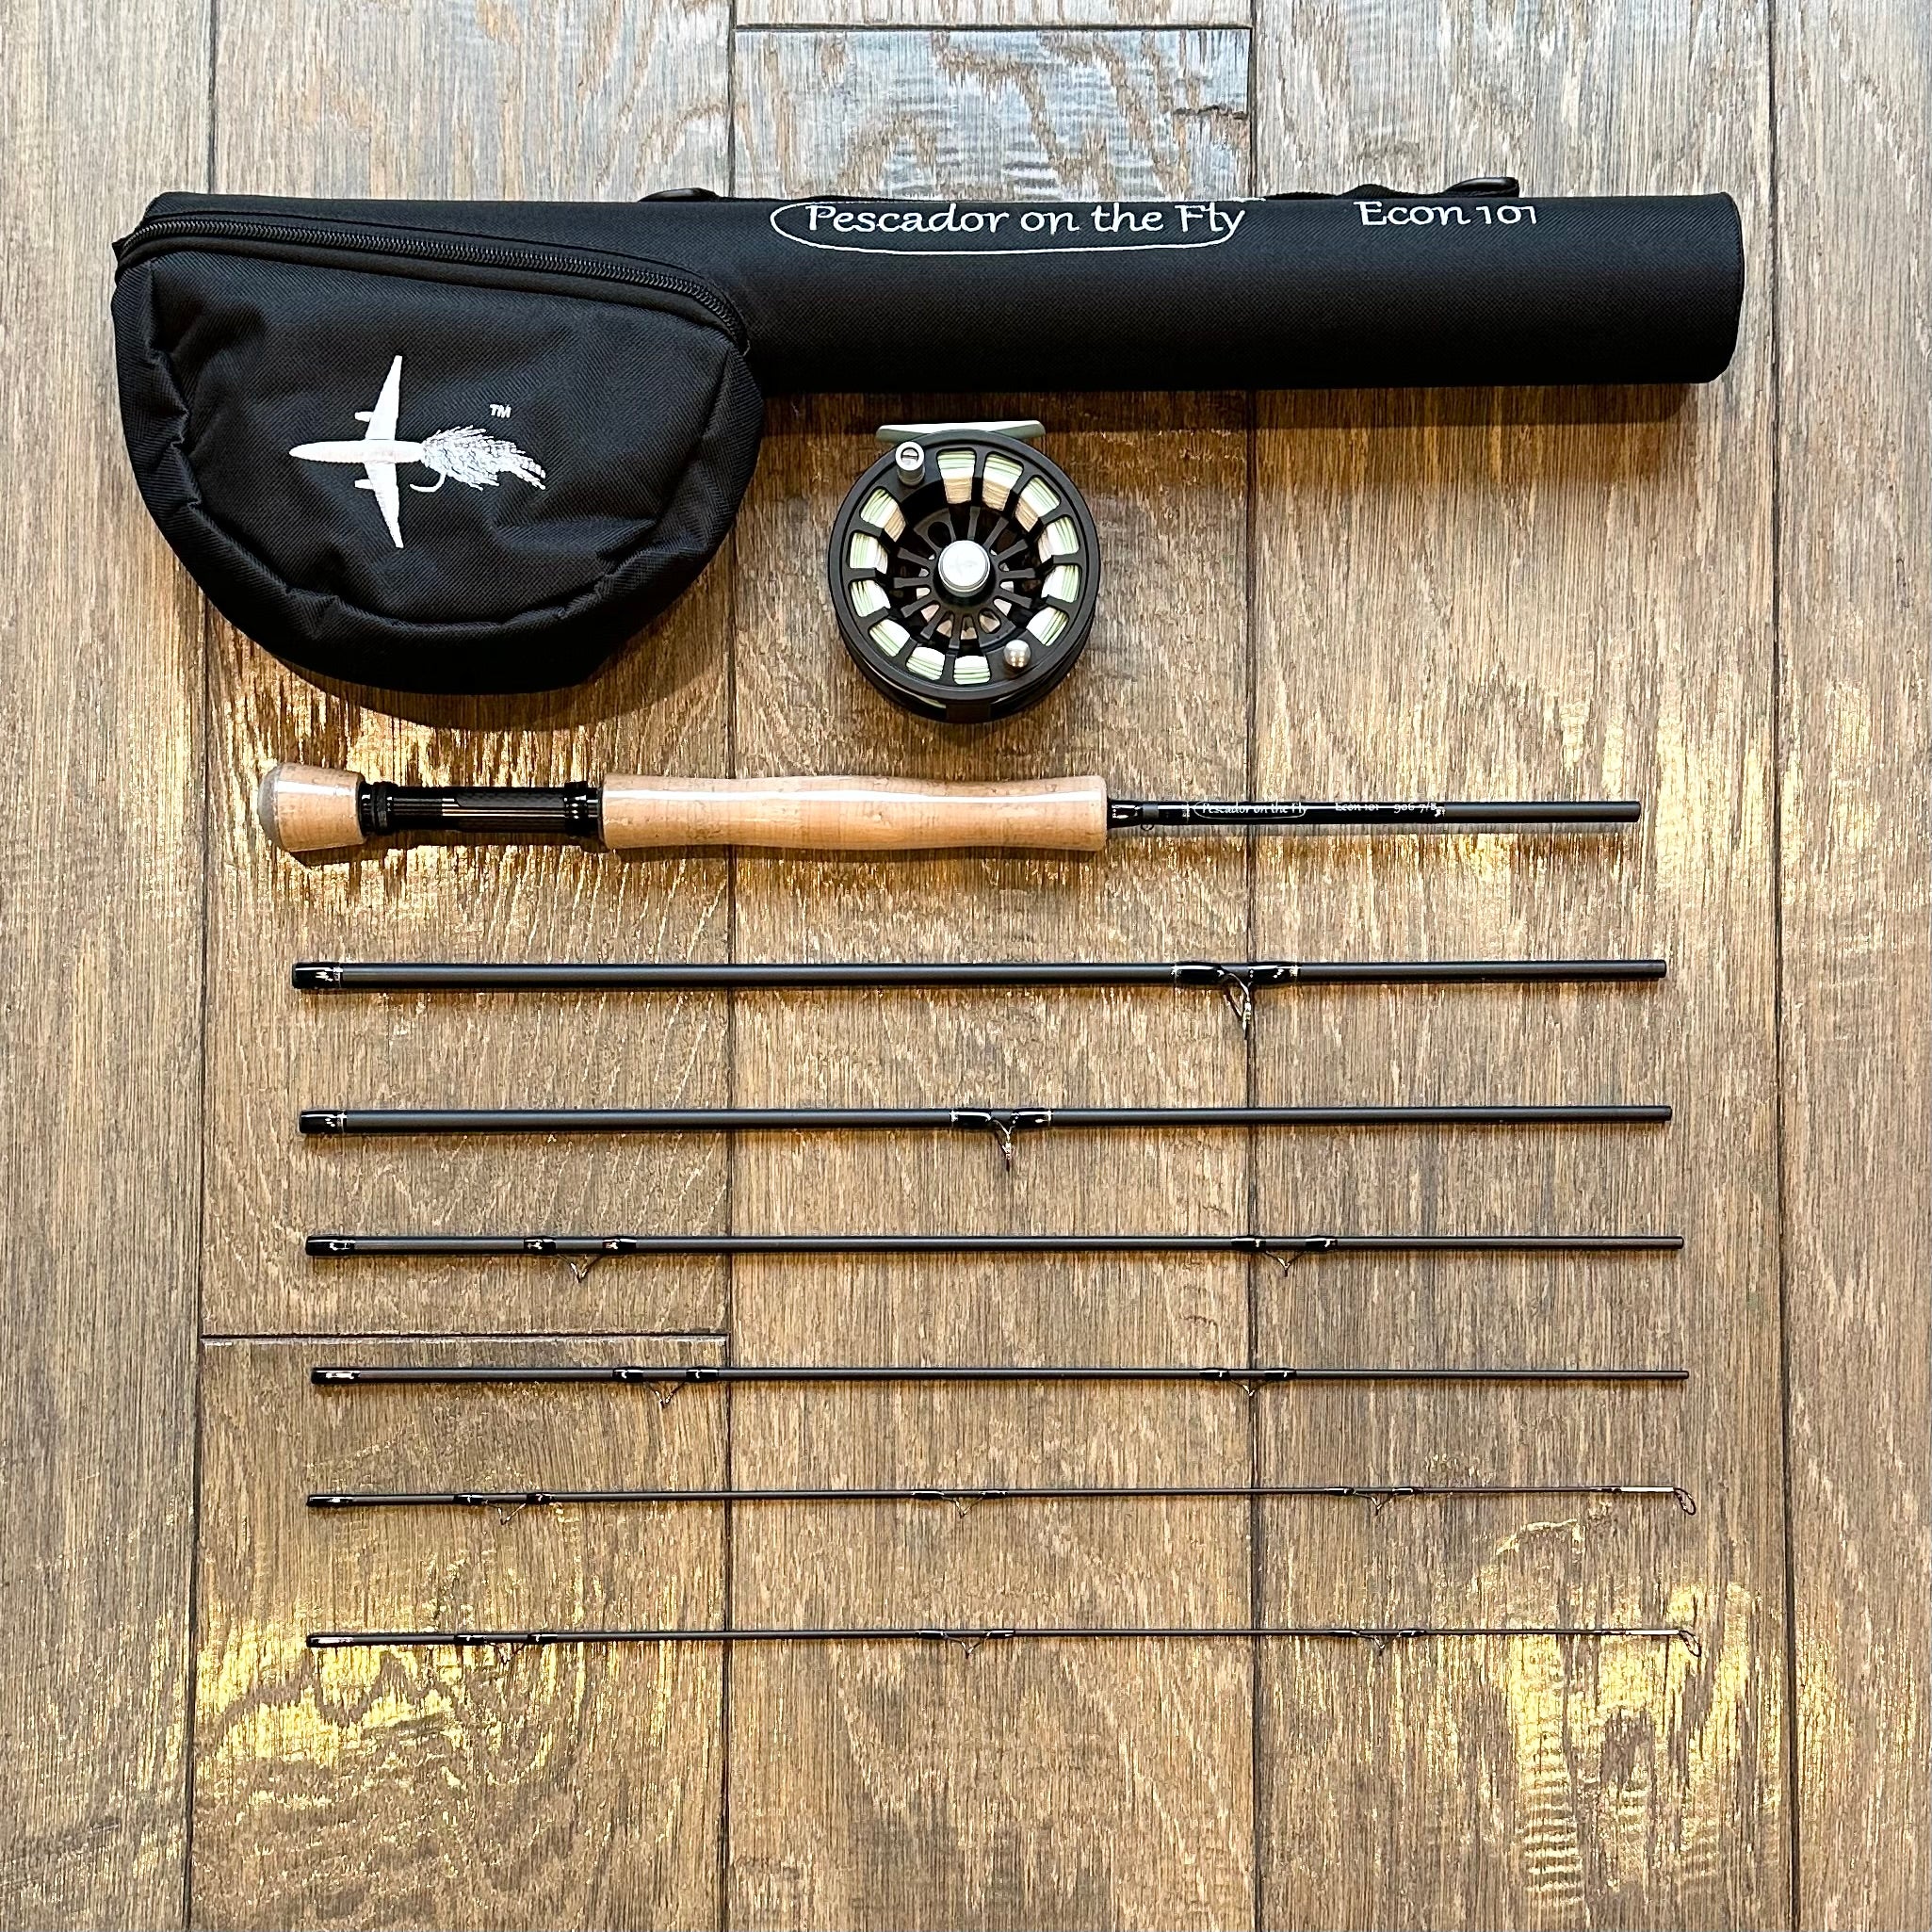 ECON 101 Packable Fly Fishing Starter Combo Package | 906-7 | 9' Six Section Portable 7 Weight Fly Rod And Reel Outfit